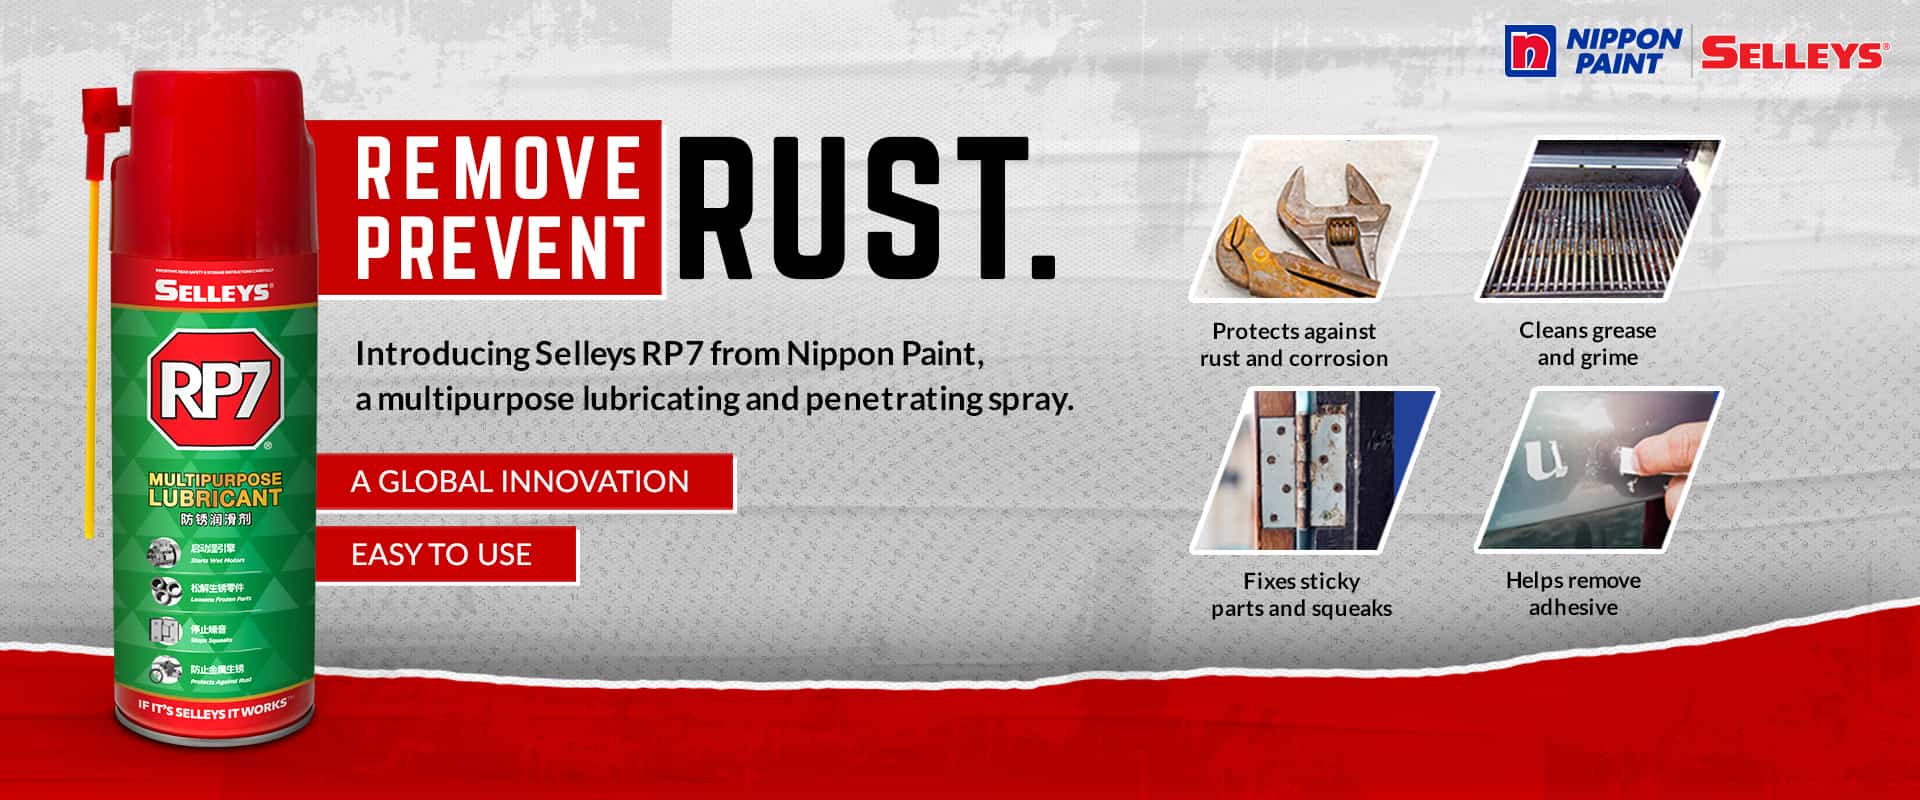 remove and prevent rust rp7 multipurpose lubricant for wall paint